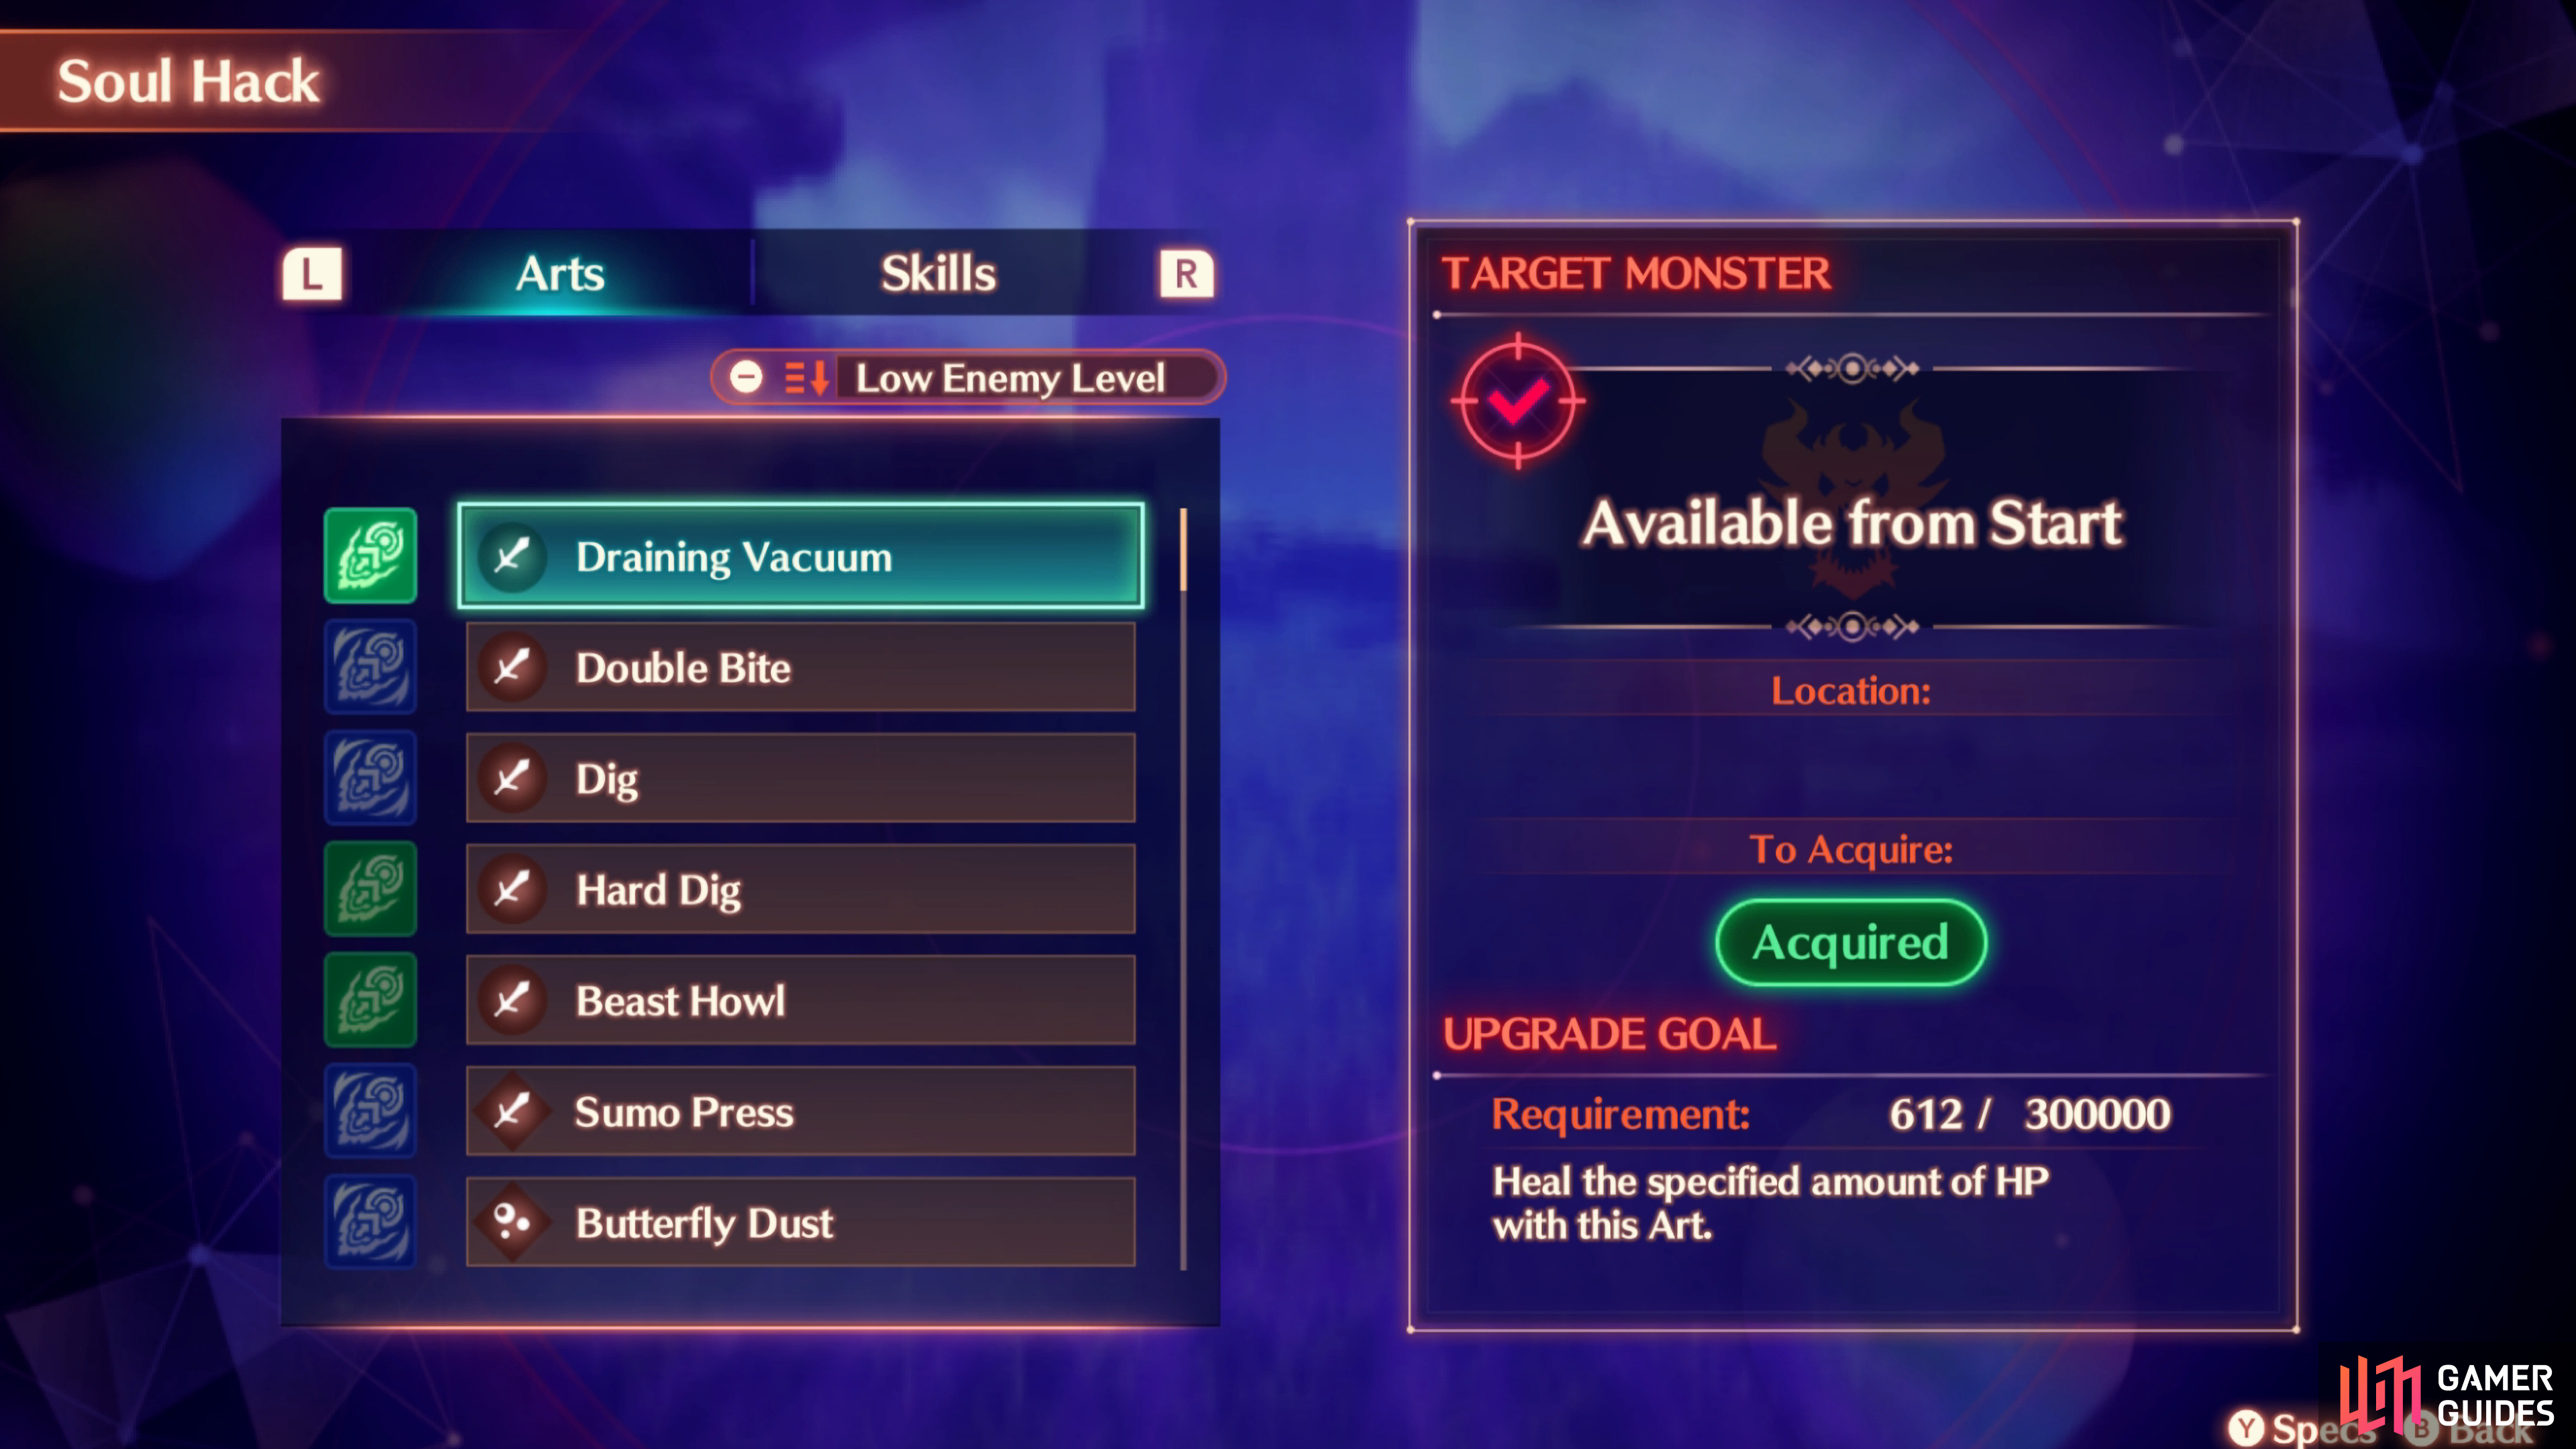 You can find what Arts you've acquired by going to the Heroes menu, and accessing the Soul Hack List by pressing Y.